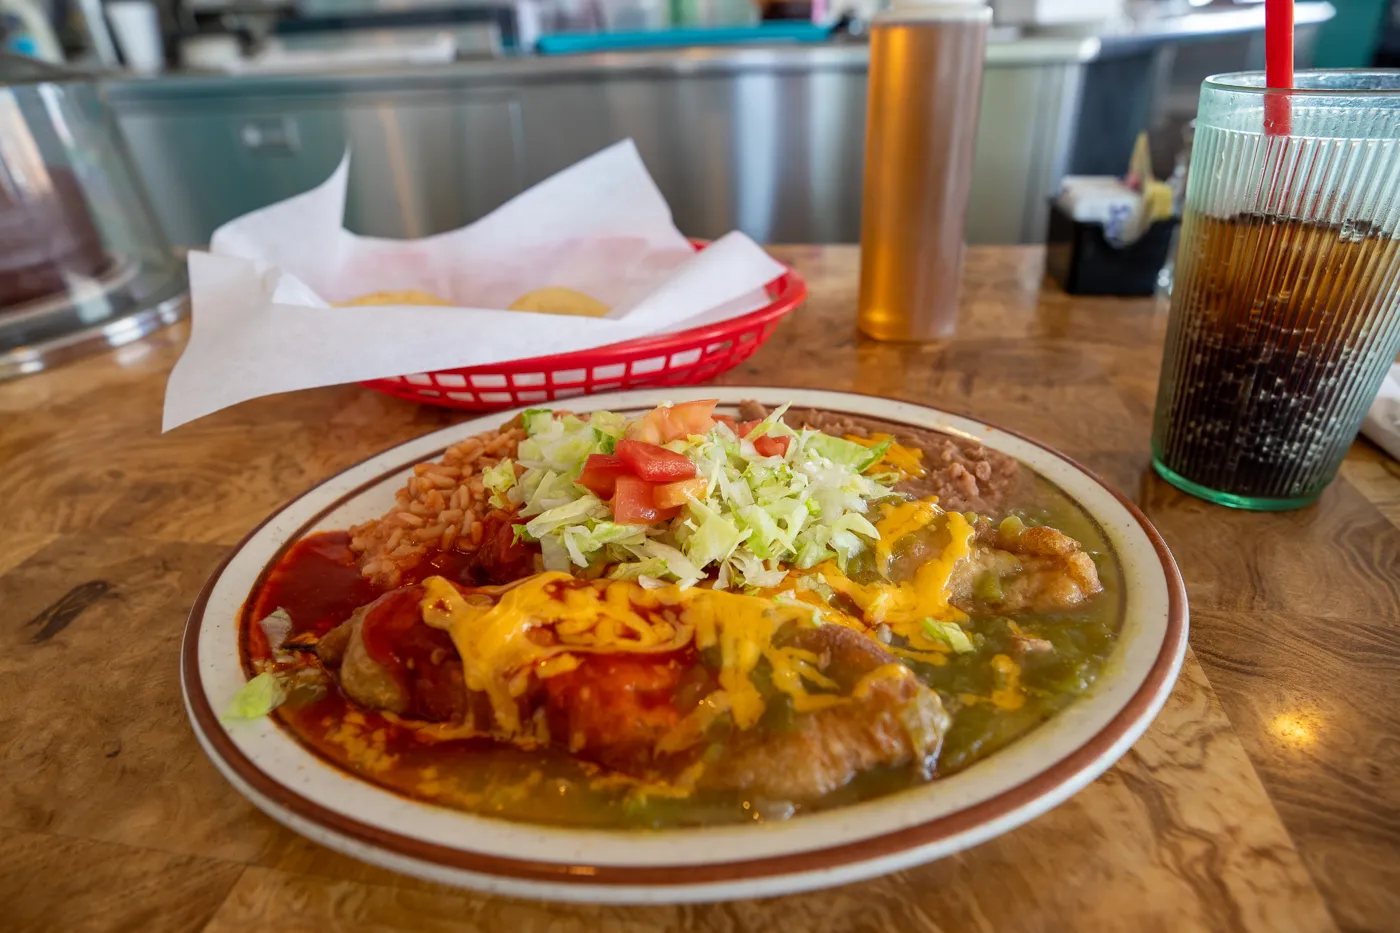 Christmas Style Chile Relleno at Loyola's Family Restaurant in Albuquerque, New Mexico Route 66 Restaurant and Breaking Bad Filming Location